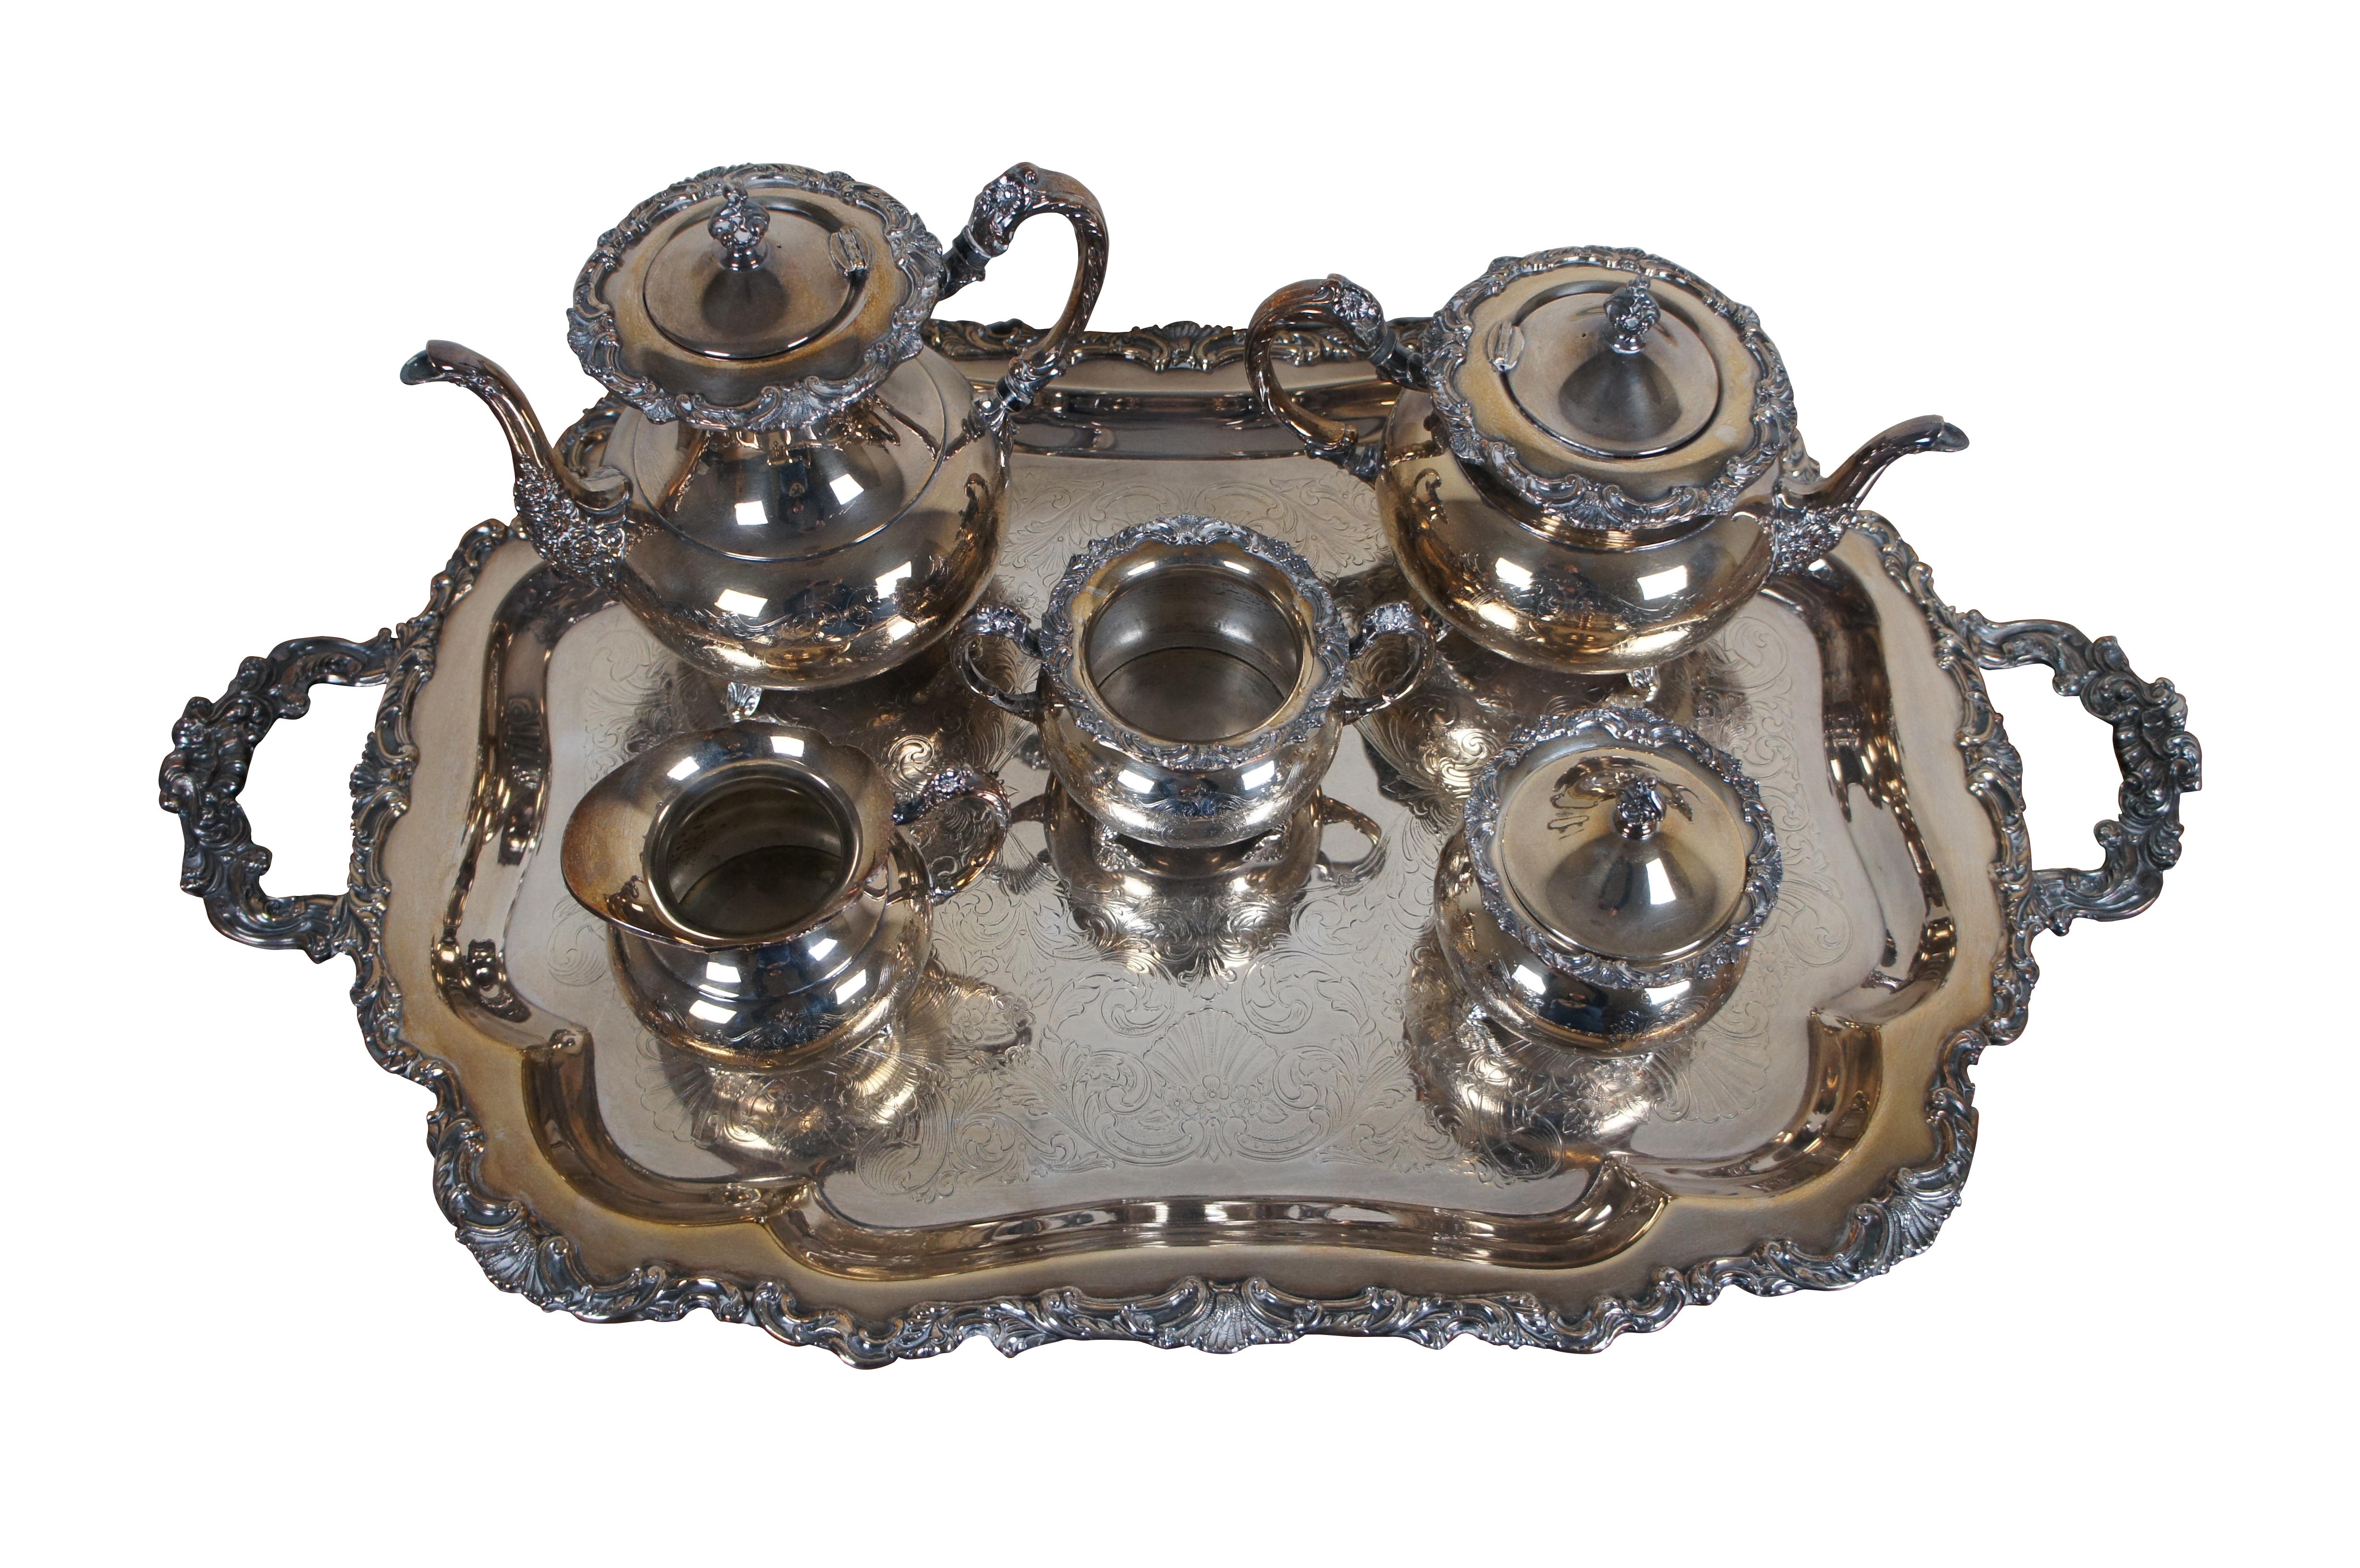 Mid century 6 piece Sheffield Design Reproduction by Community silver plate tea set, including  a large handled / footed tray, tea pot and coffee pot with hinged lids, cream pitcher, waste pot, and lidded sugar bowl. Decorated with molded and etched